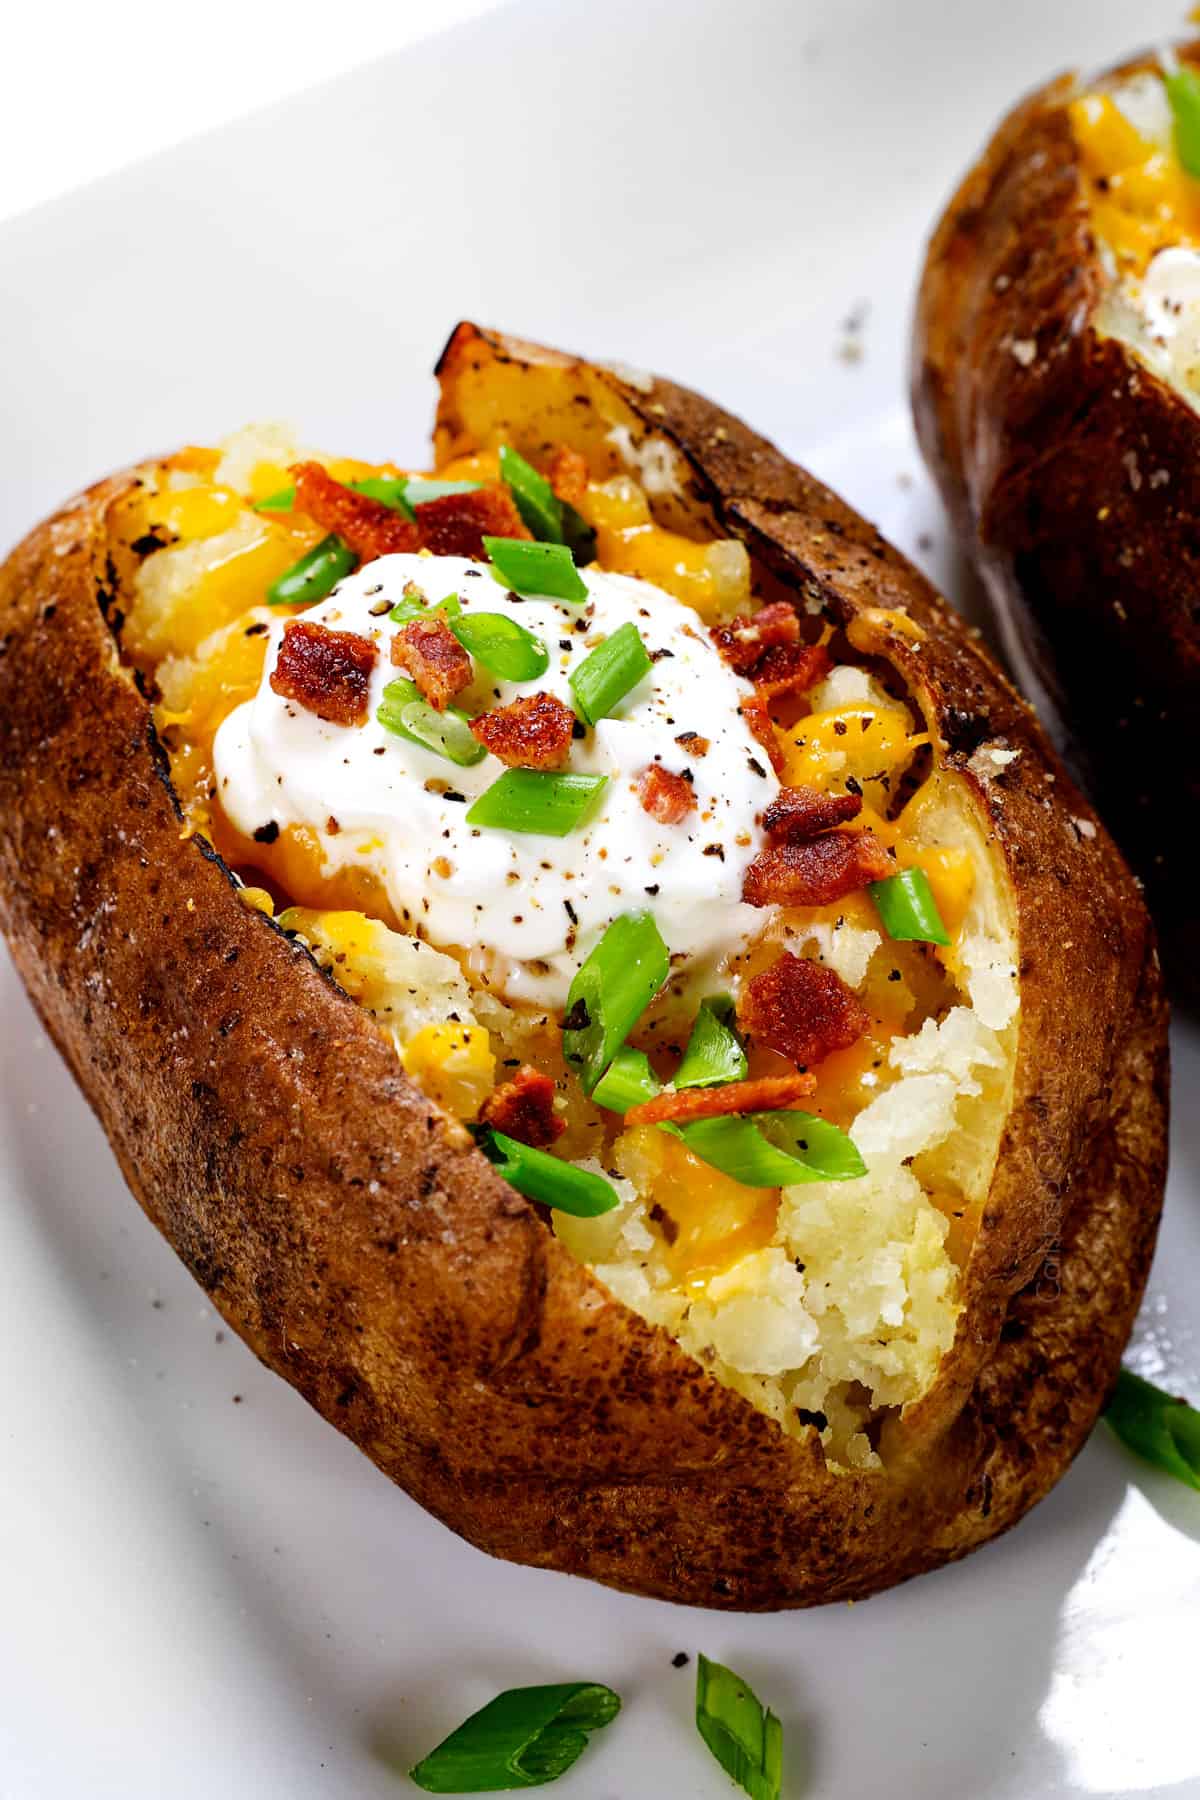 baked potato recipe being served with cheese, bacon, sour cream and green onions